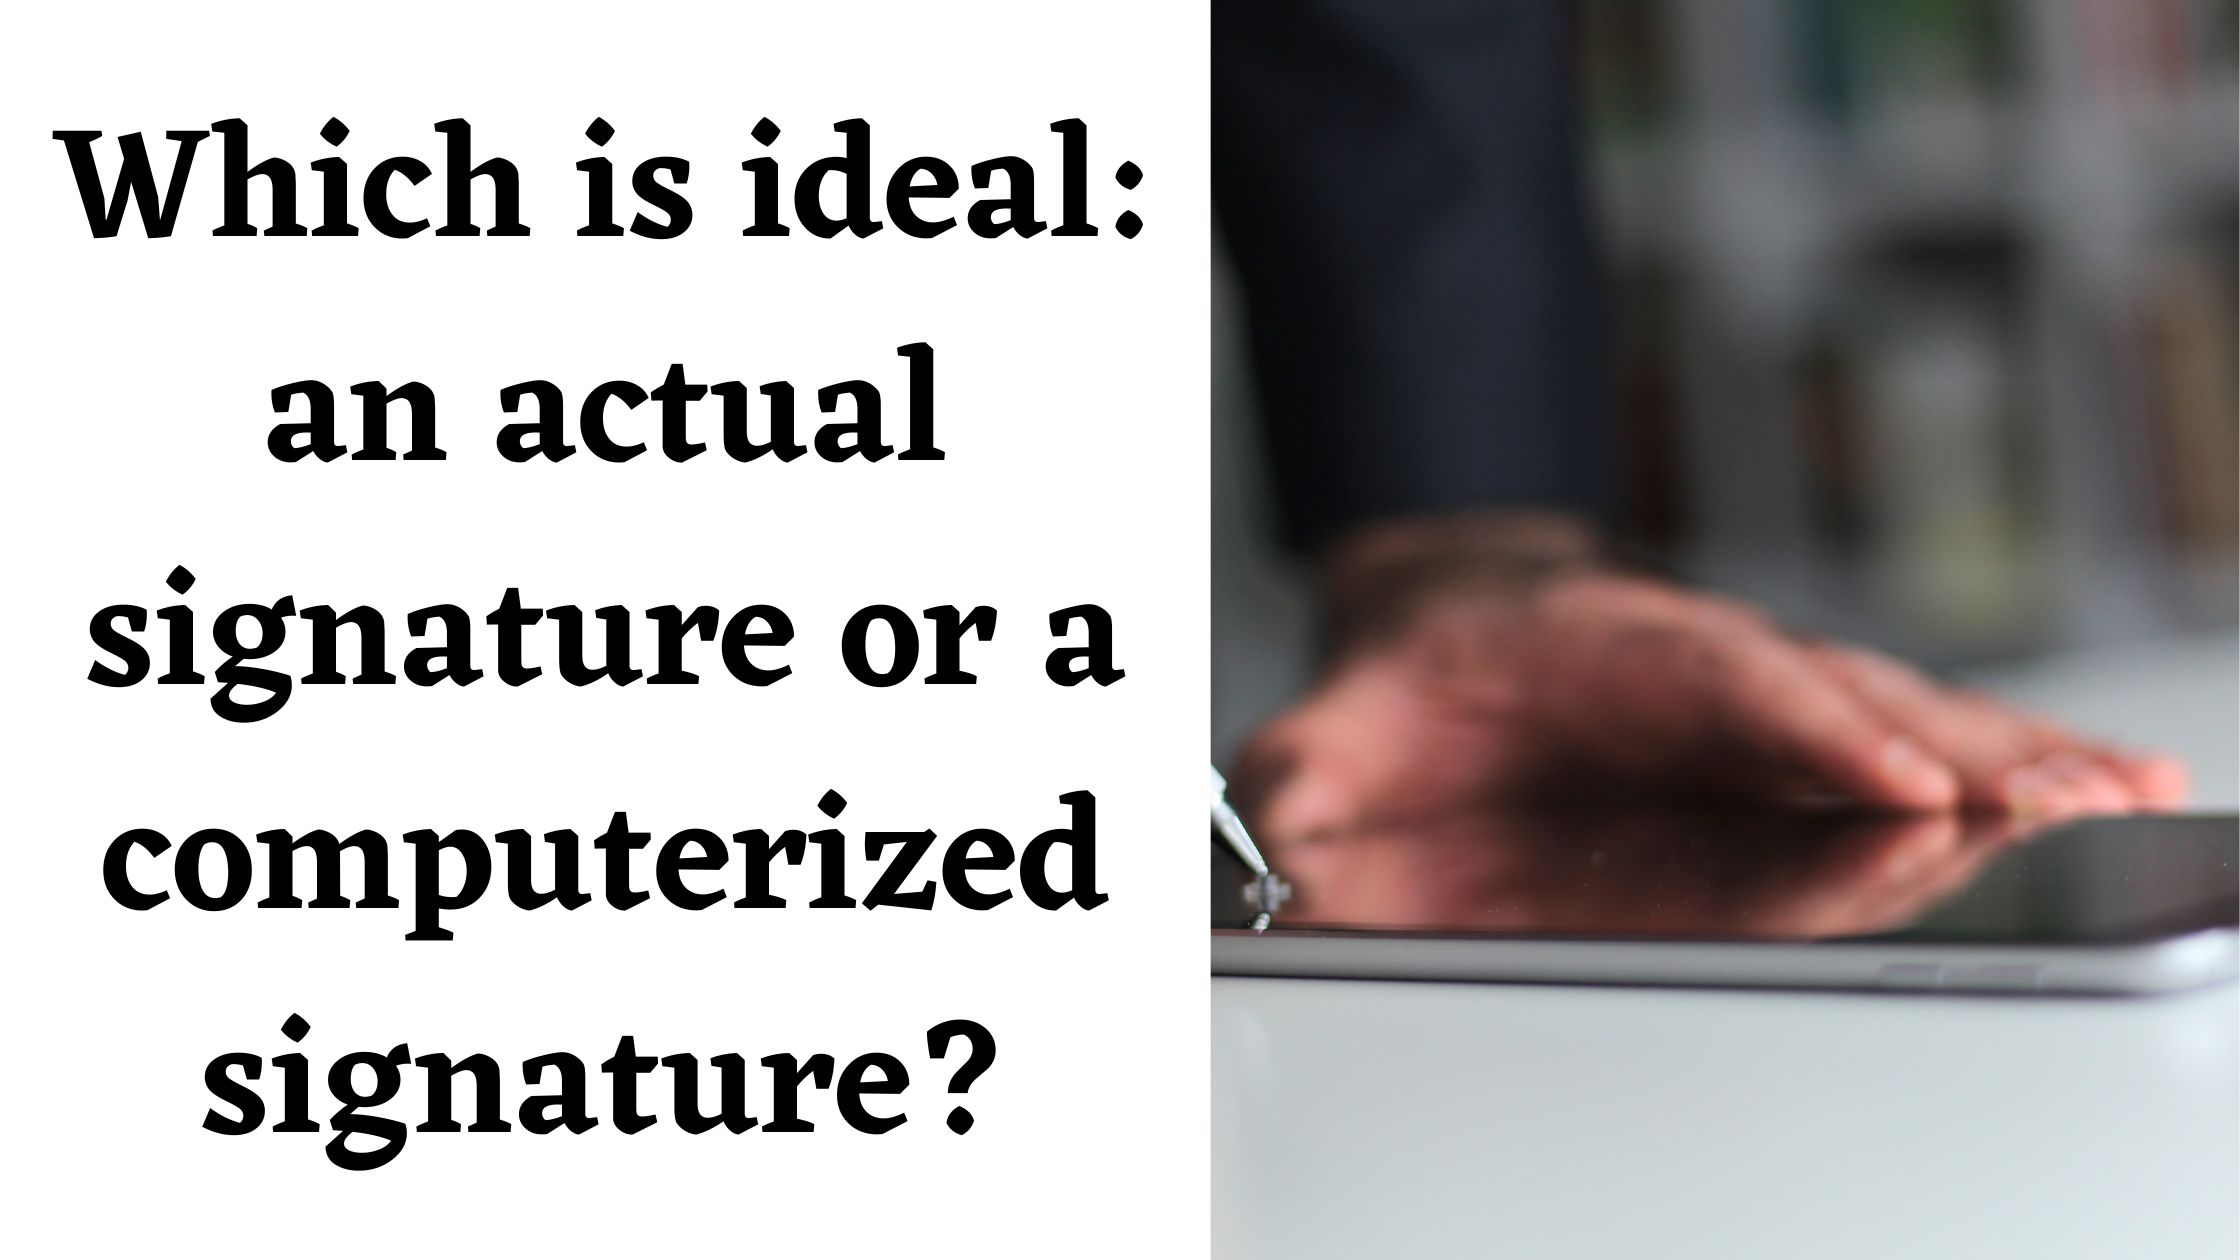 Which is ideal: an actual signature or a computerized signature?